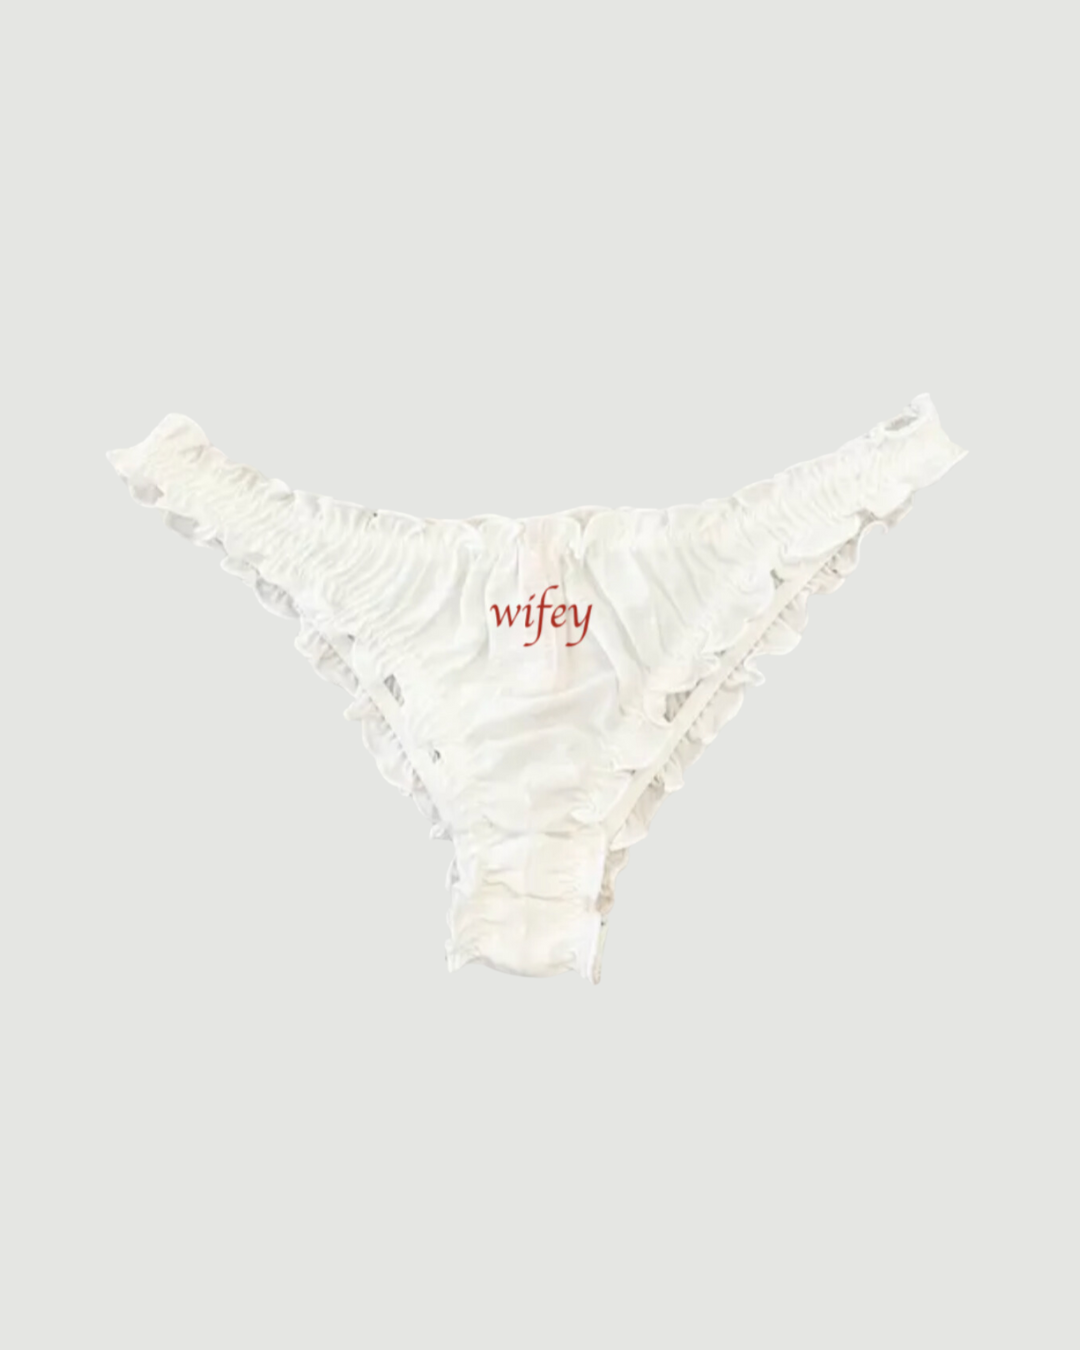  Personalized Victoria's Secrets underwear thong style in  coconut-white/light ivory : Handmade Products